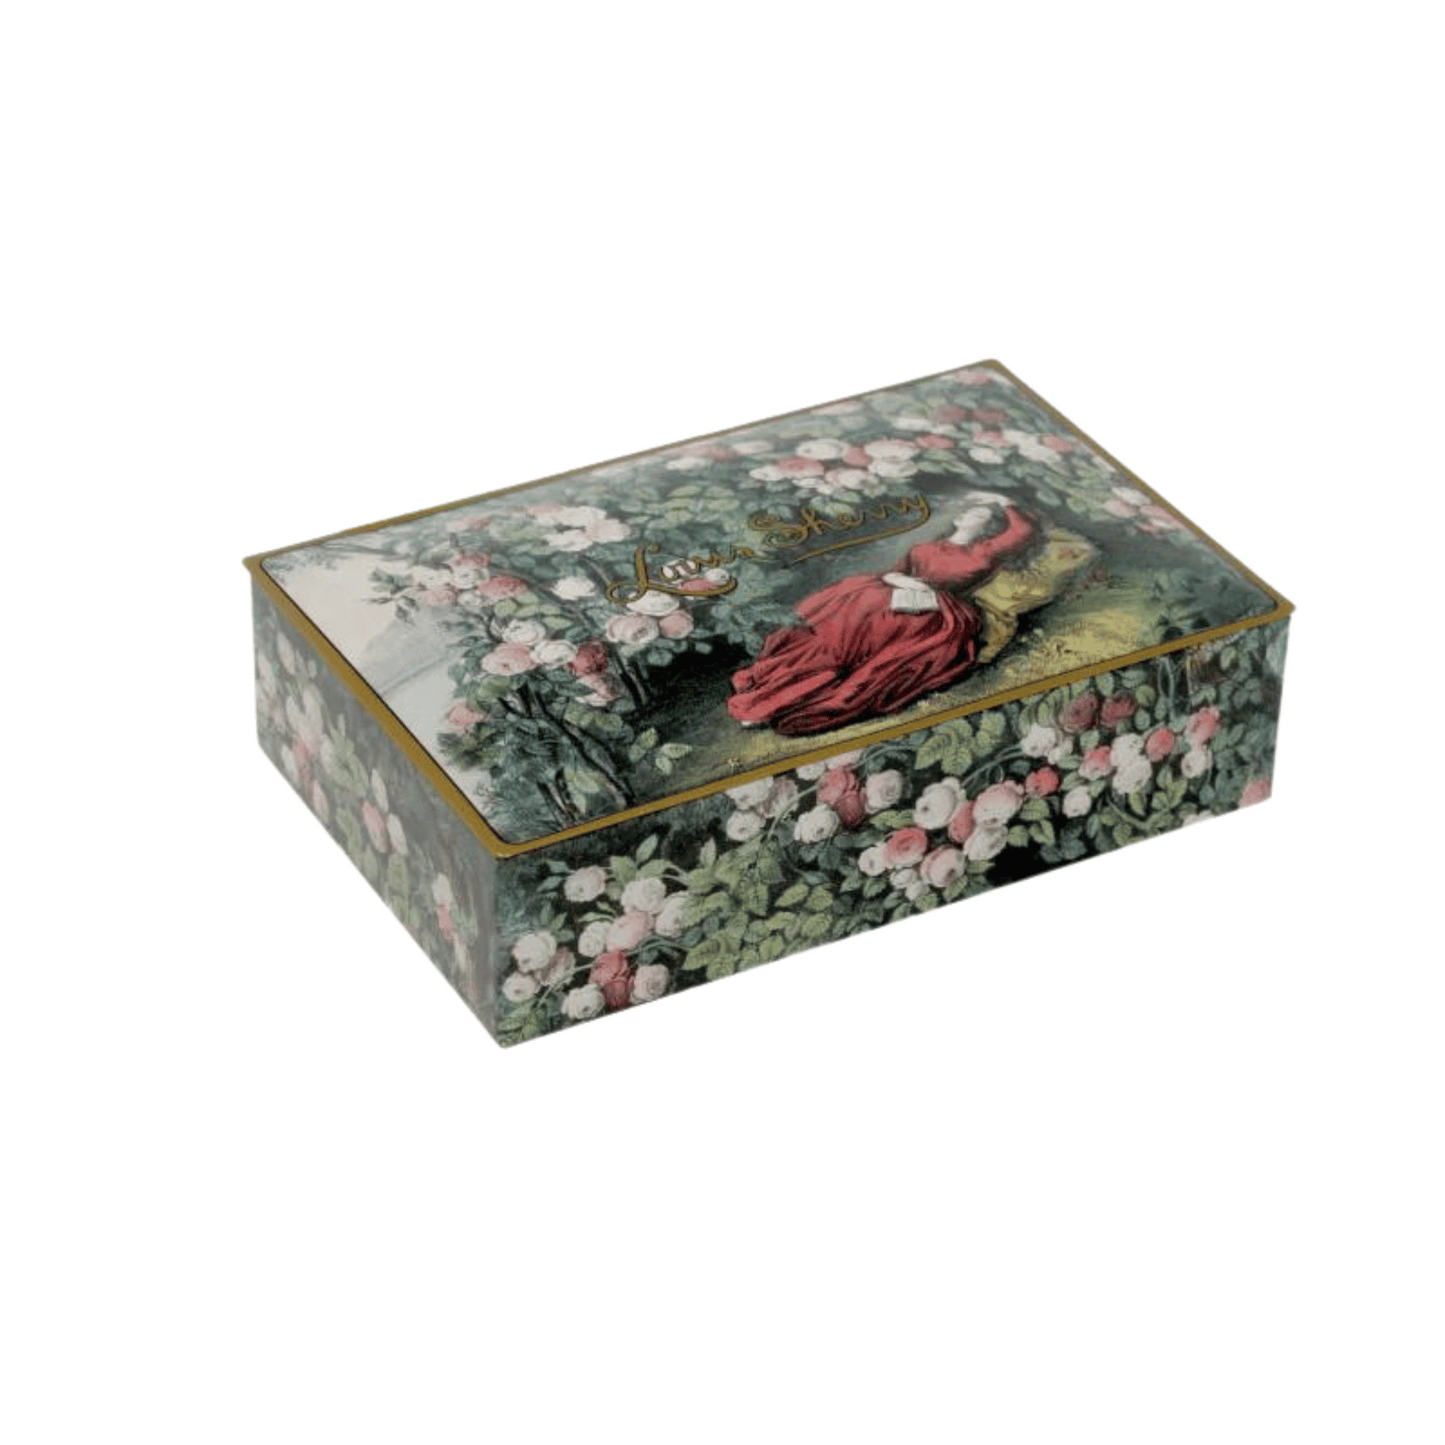 Primary Image of John Derian Bower of Roses Chocolate Tin